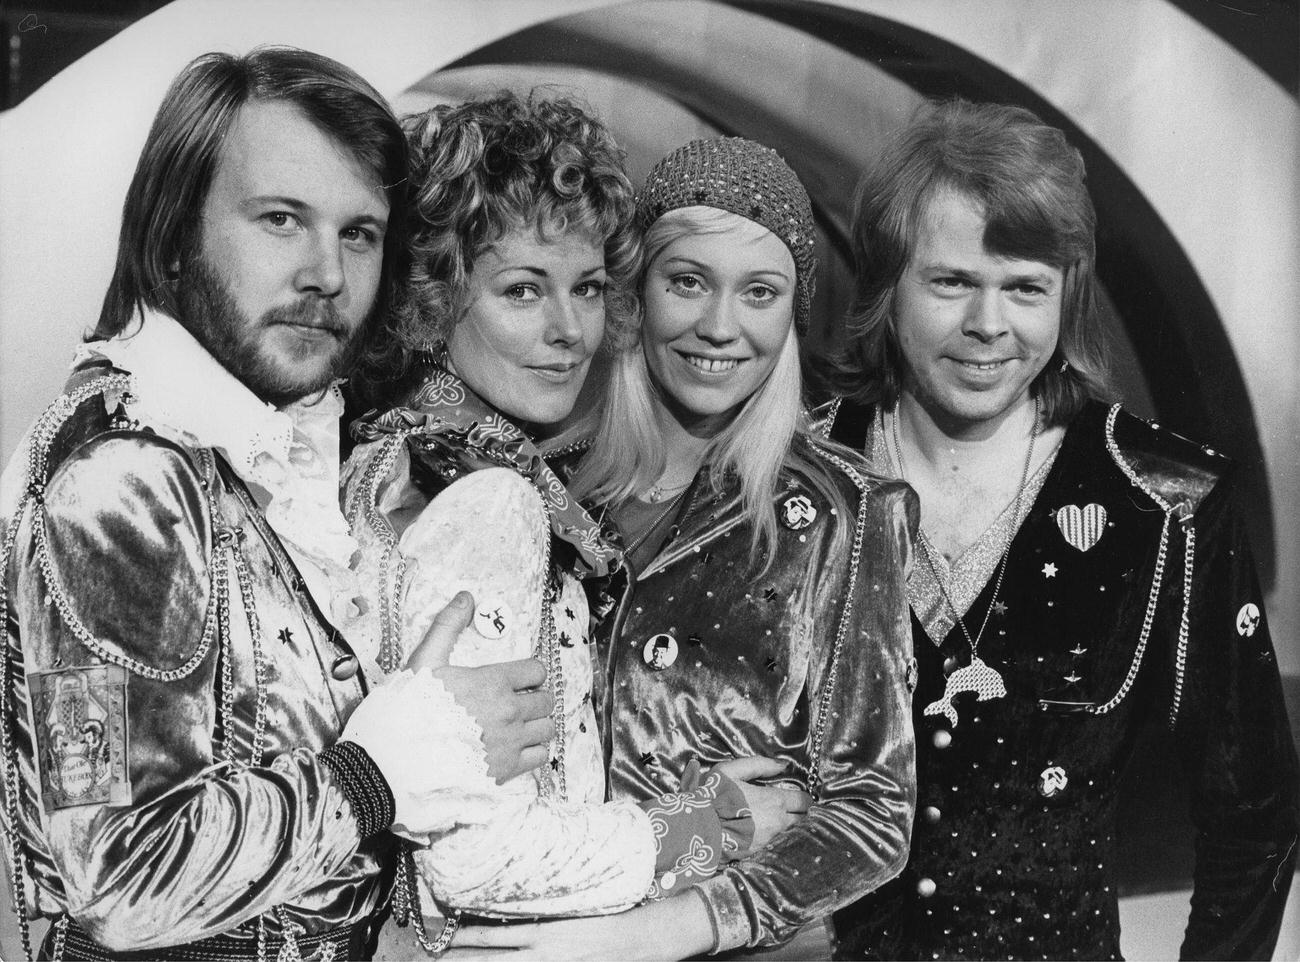 Benny Andersson; Anni-Frid Lyngstad; Agnetha Fältskog and Björn Ulvaeus. Photograph. Euro Vision Song Contest 1974 in Brighton